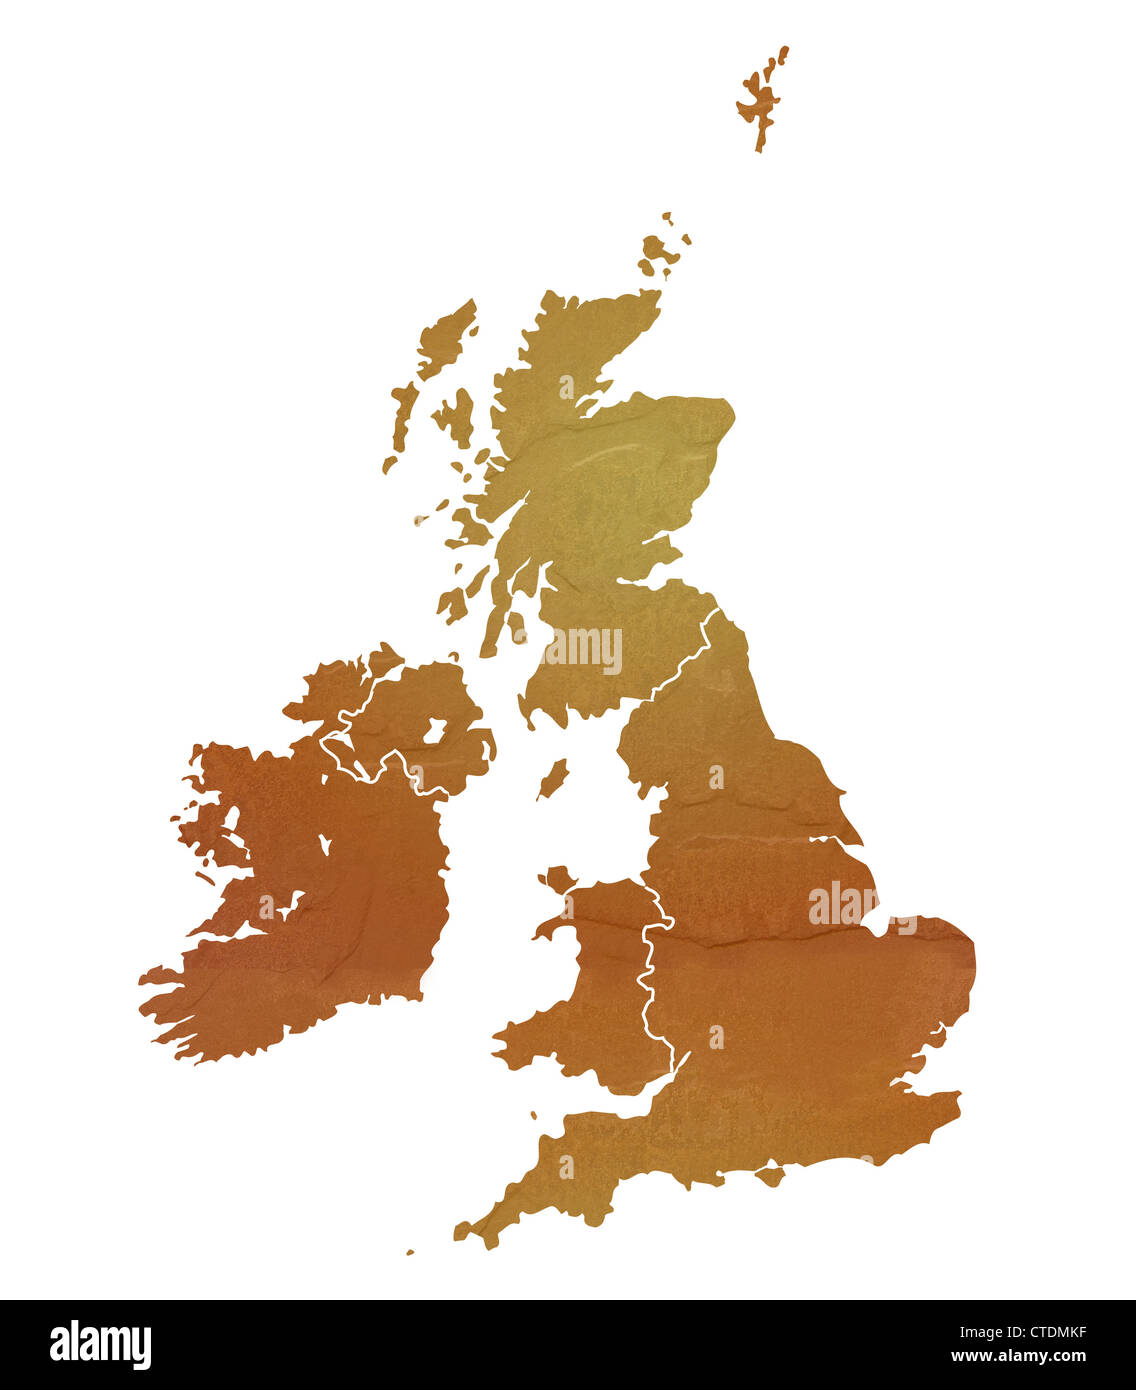 United Kingdom map with brown rock or stone texture, isolated on white background with clipping path. Stock Photo